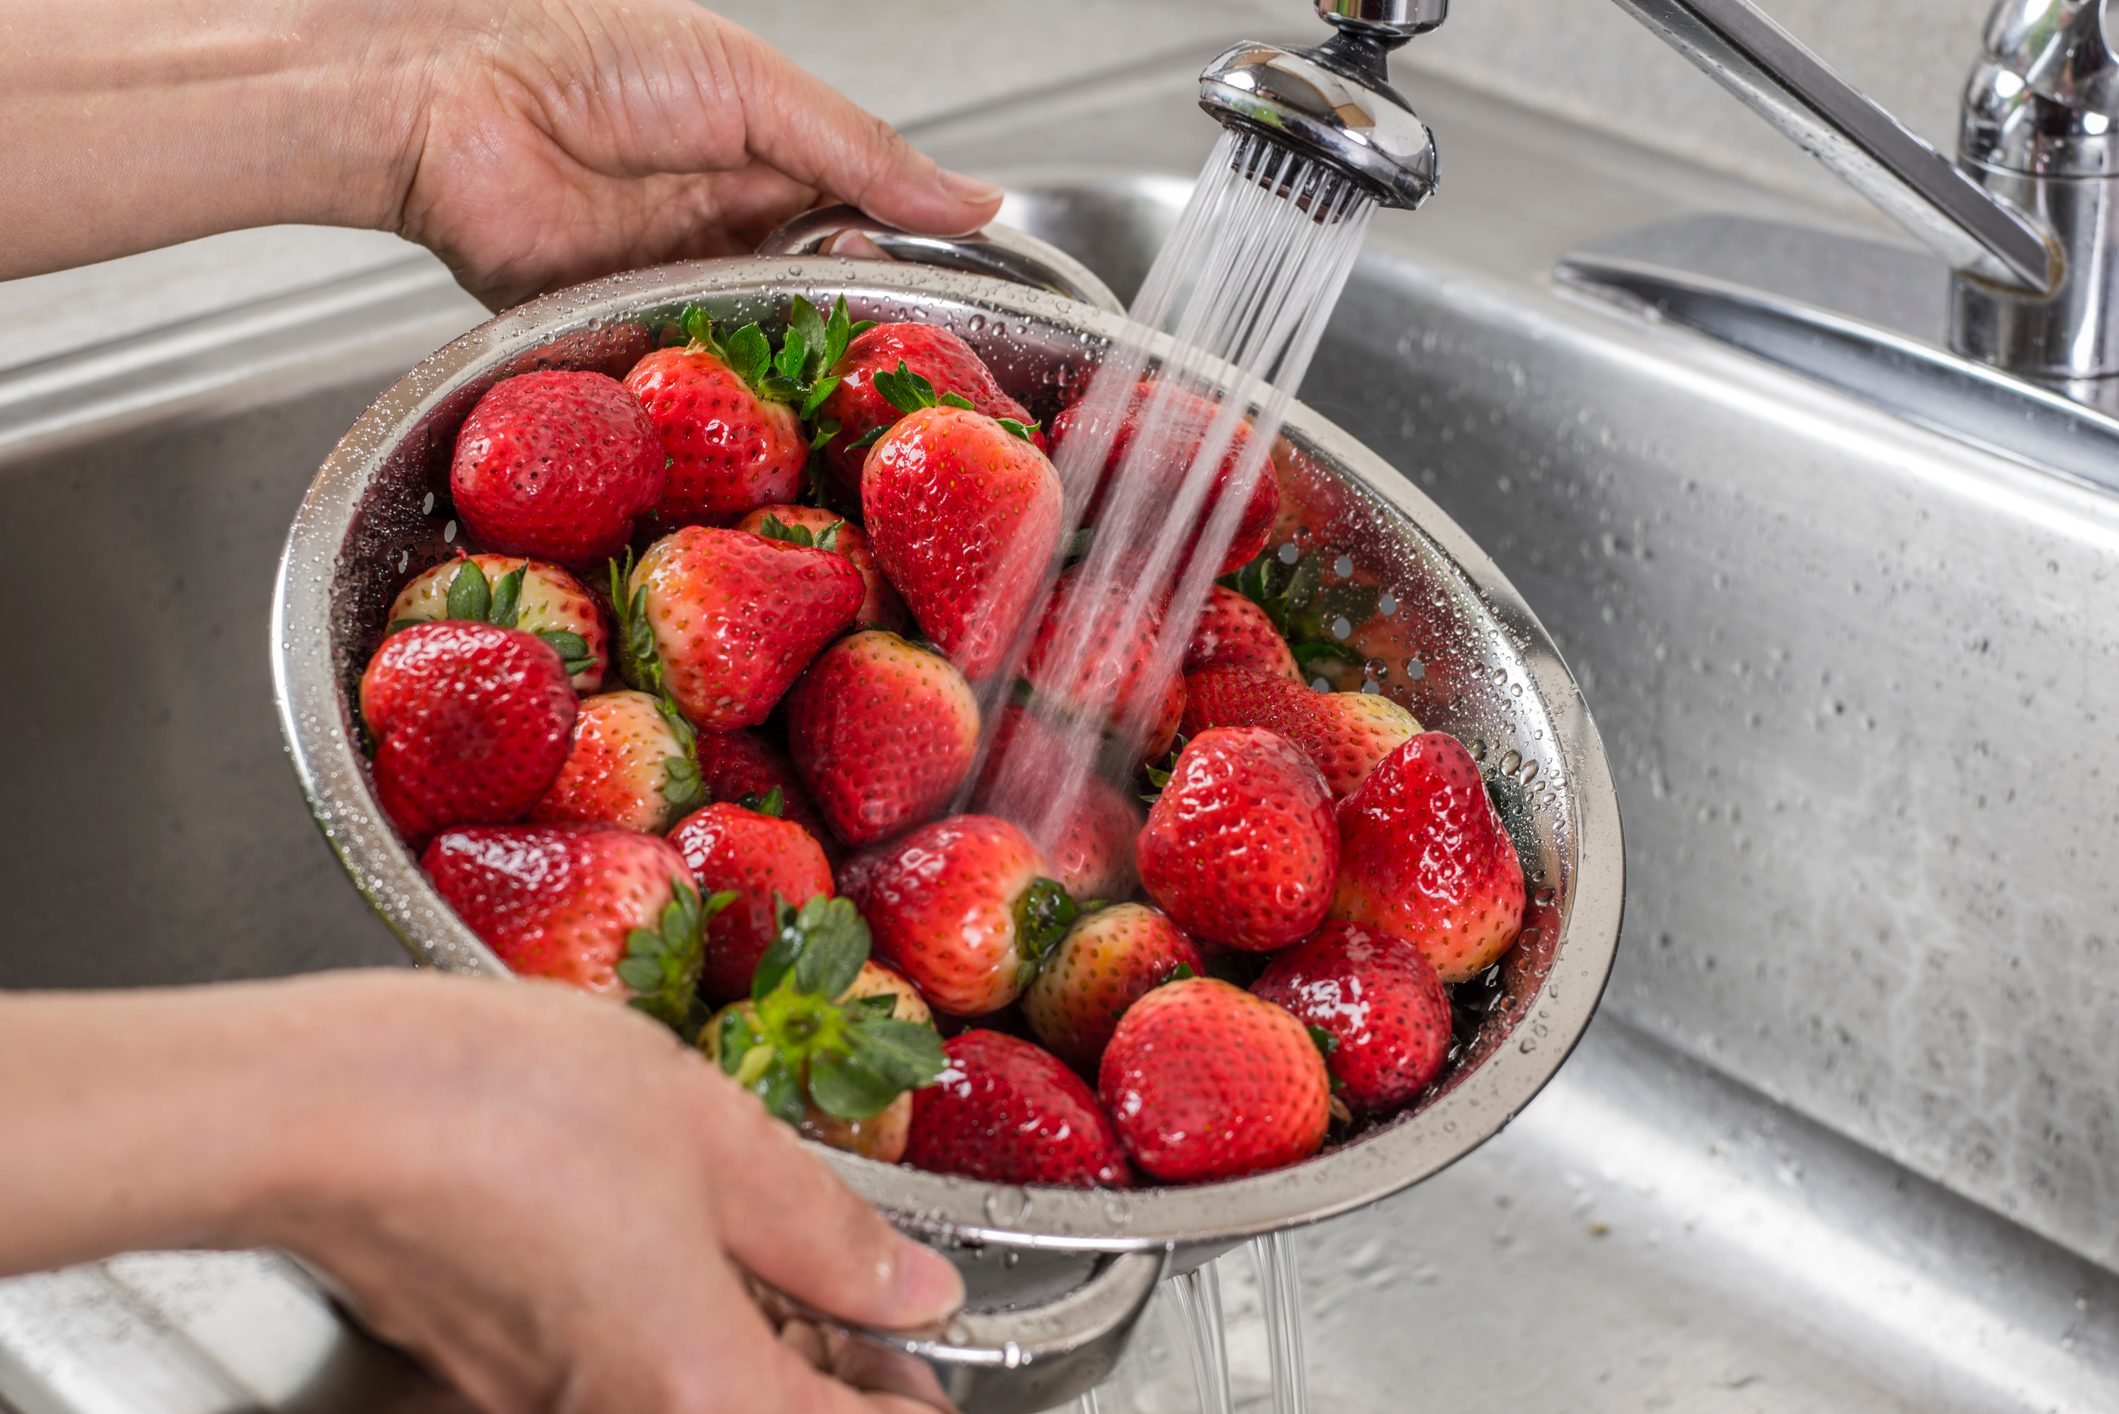 How to Wash Strawberries - Tips on Cleaning Strawberries